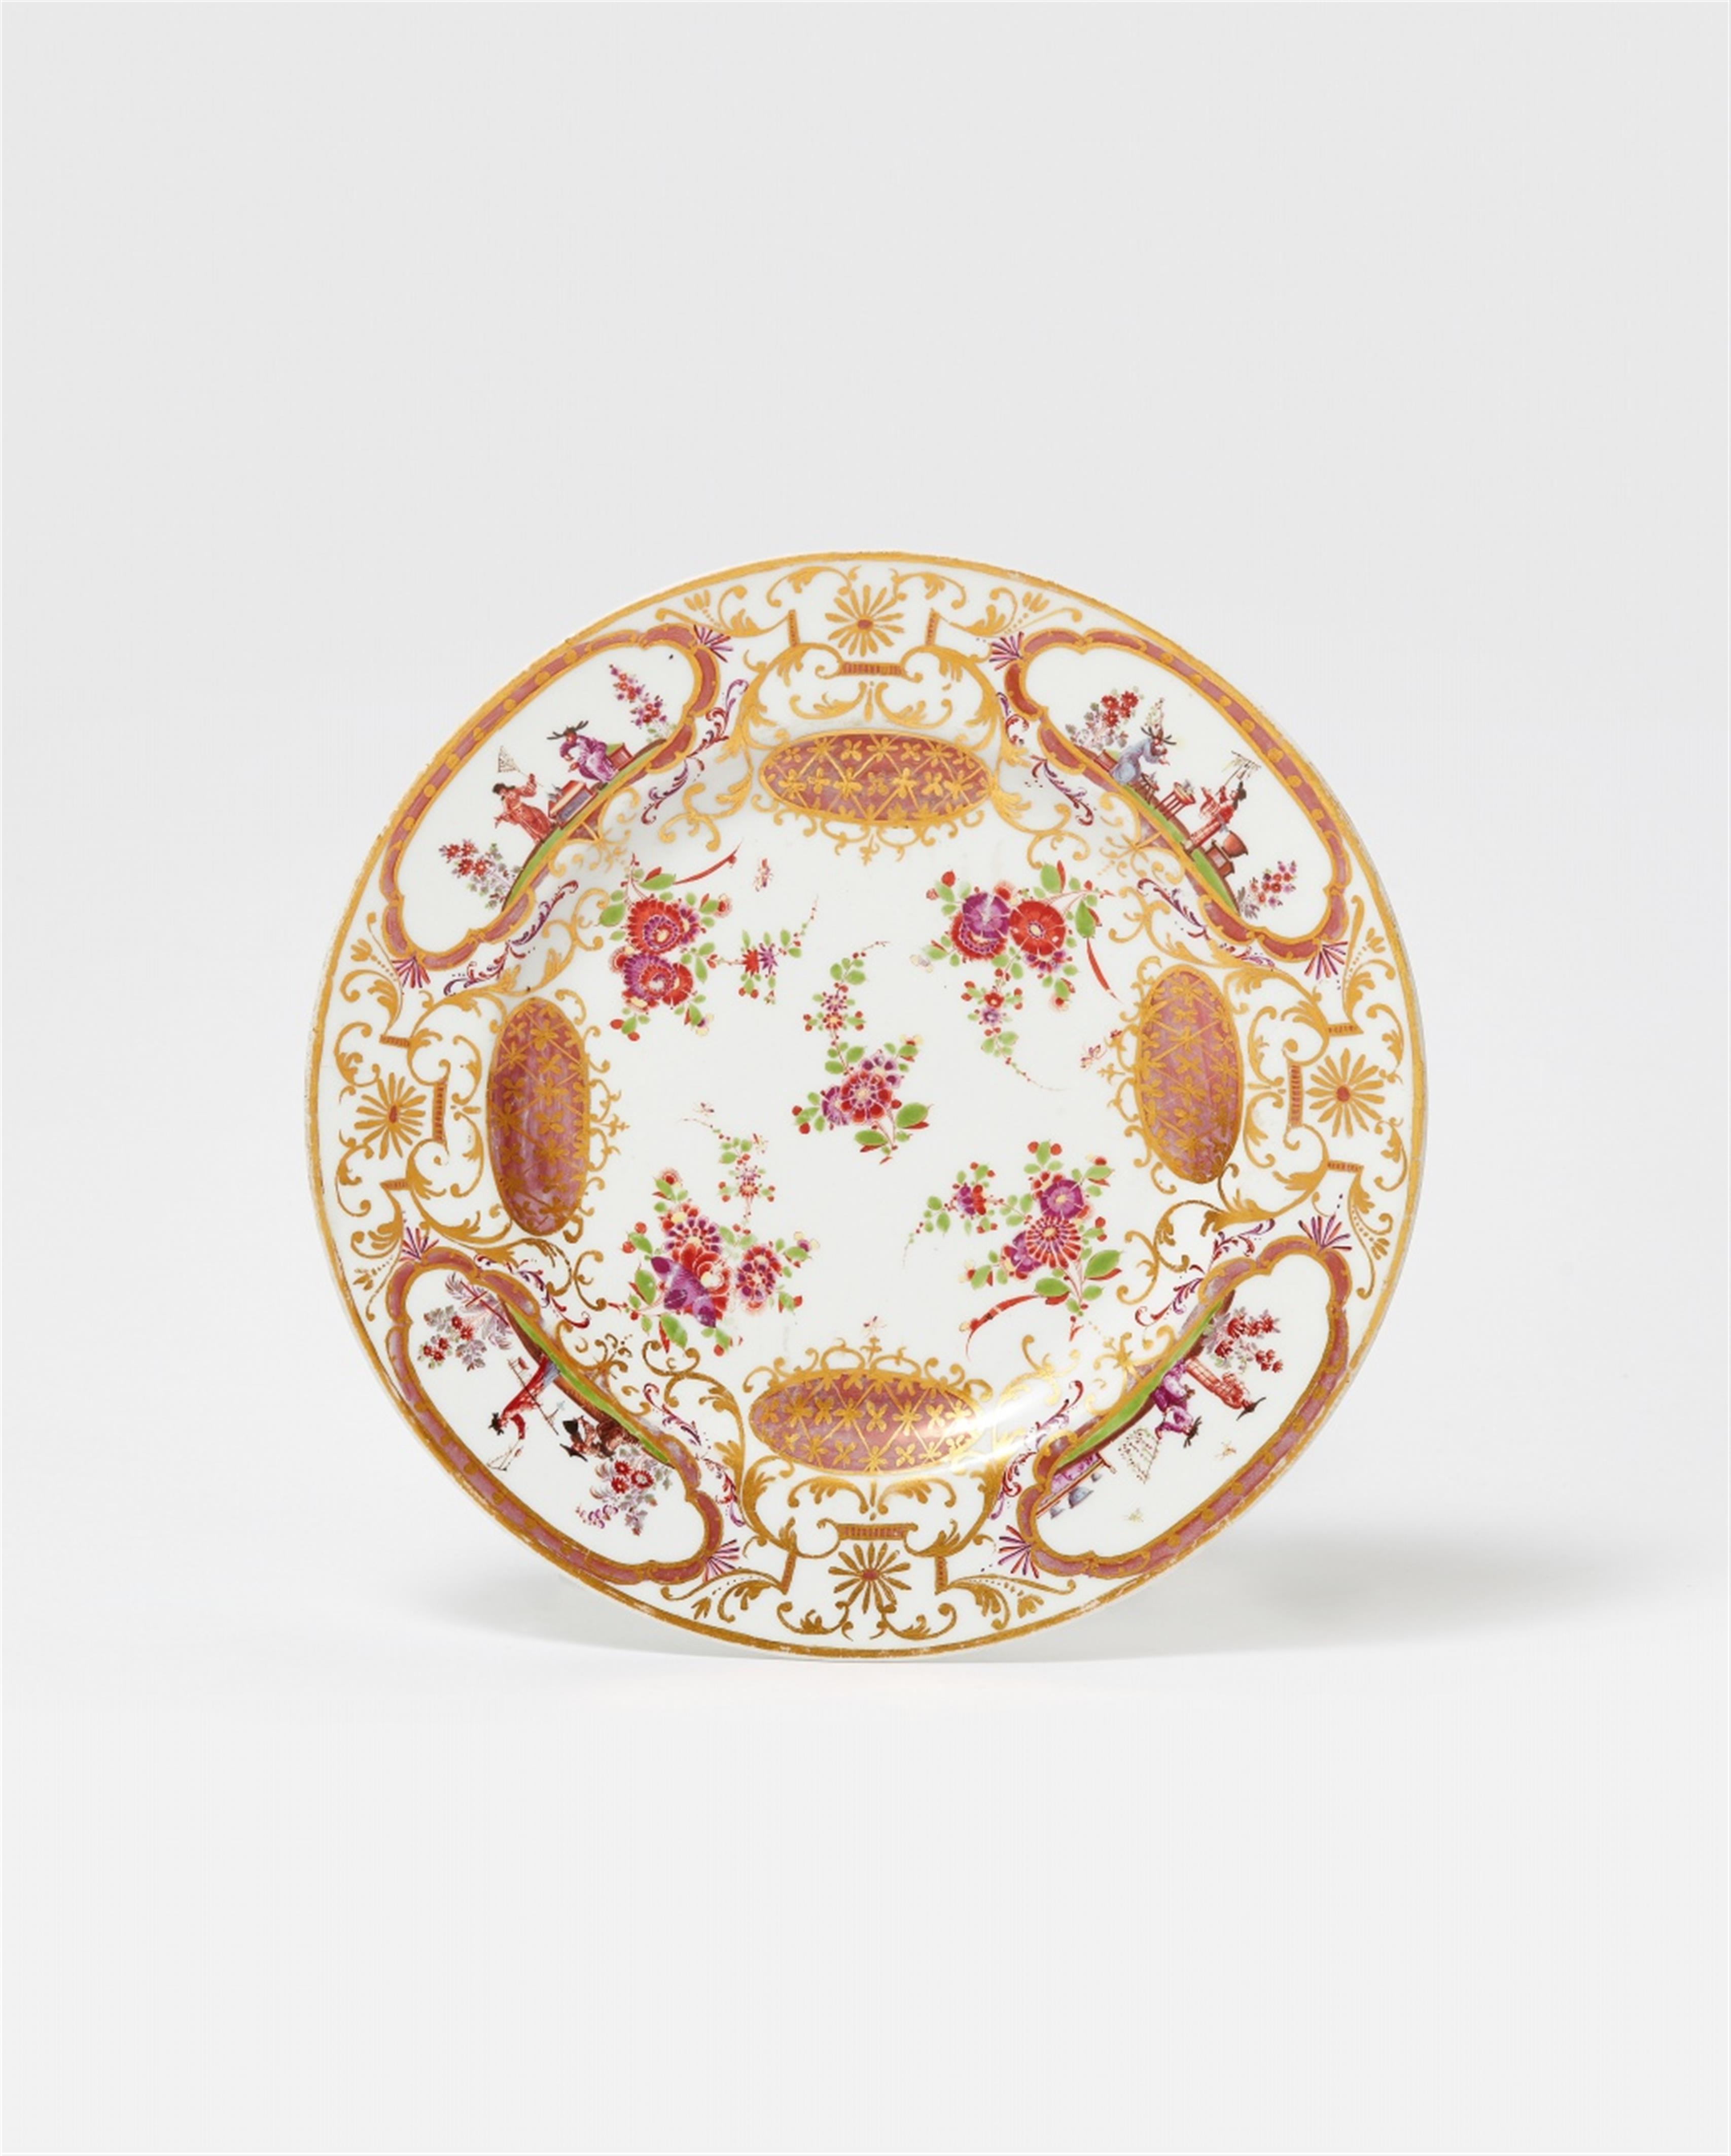 A Meissen porcelain plate with Hoeroldt Chinoiseries - image-1